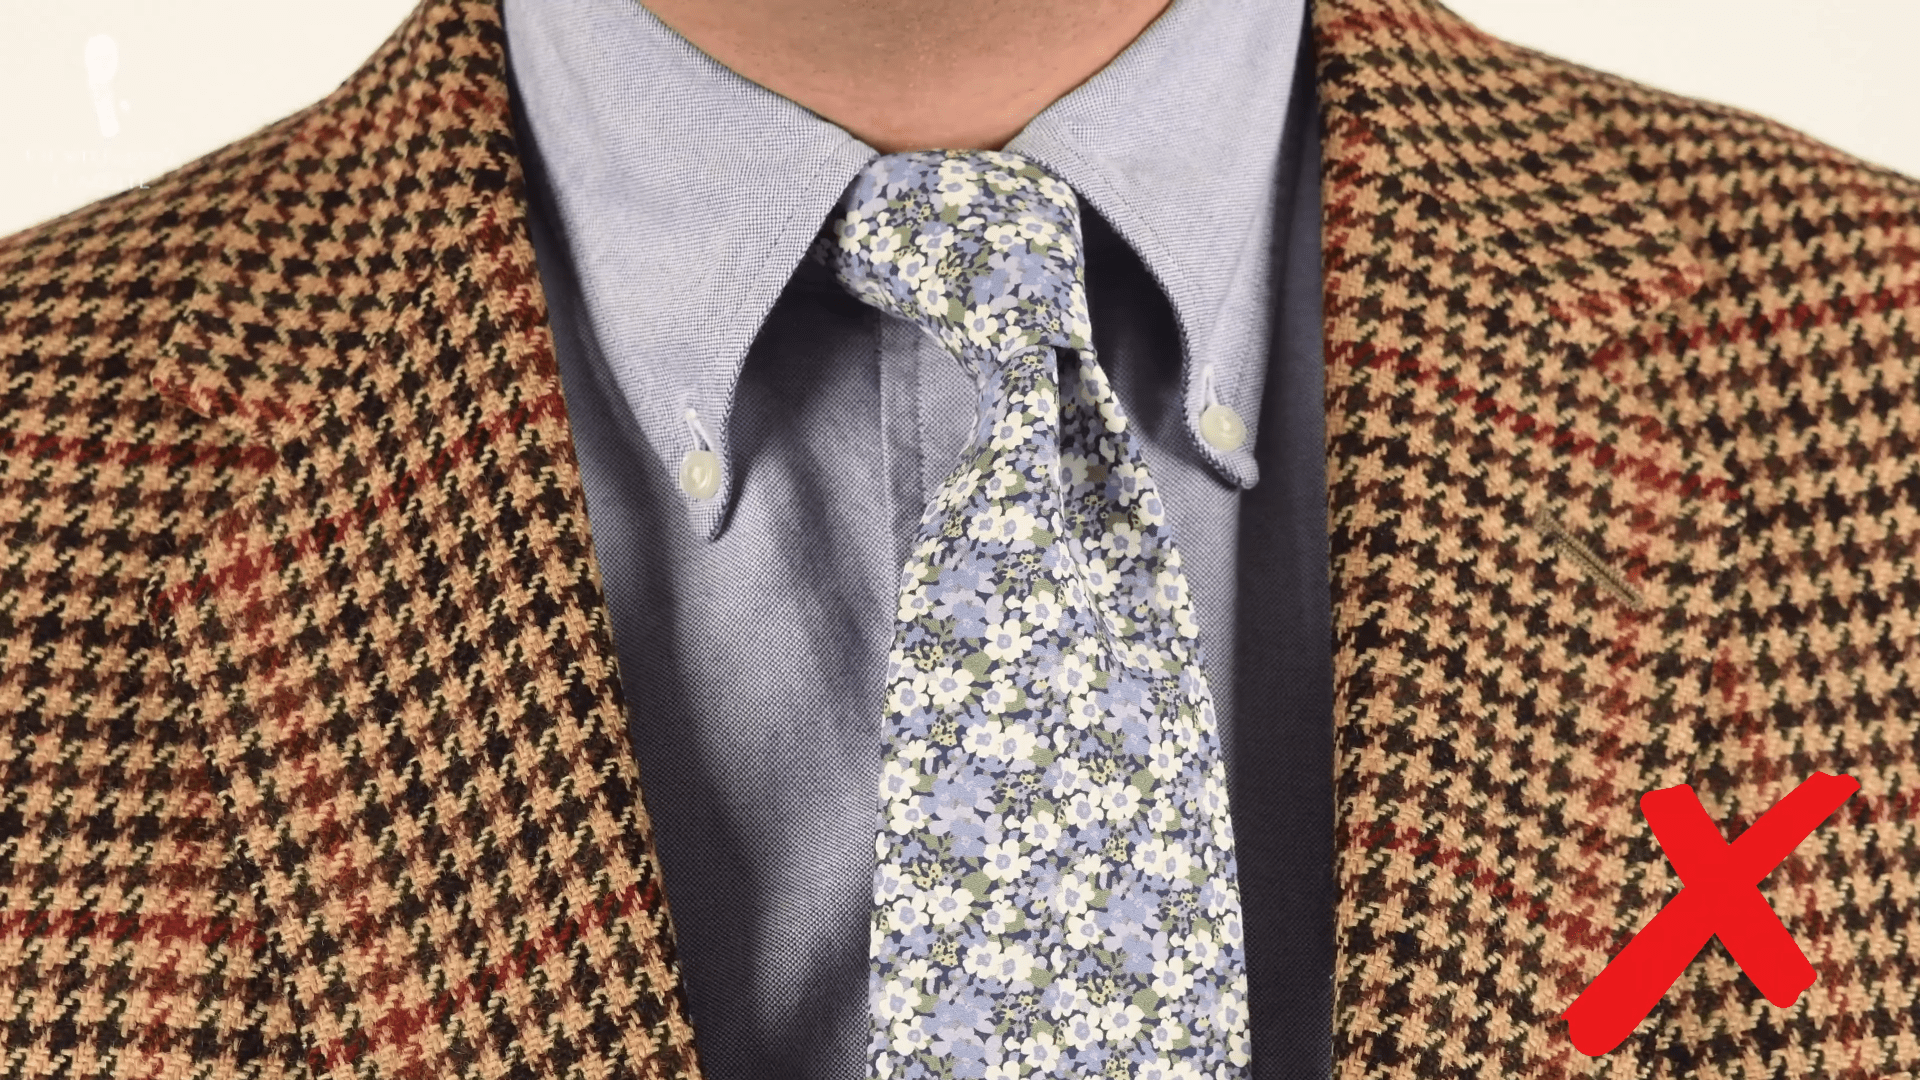 Inspiration - floral yet formal.👔www.Grandfrank.com | Floral shirt suit,  Men floral shirt, Floral shirt outfit